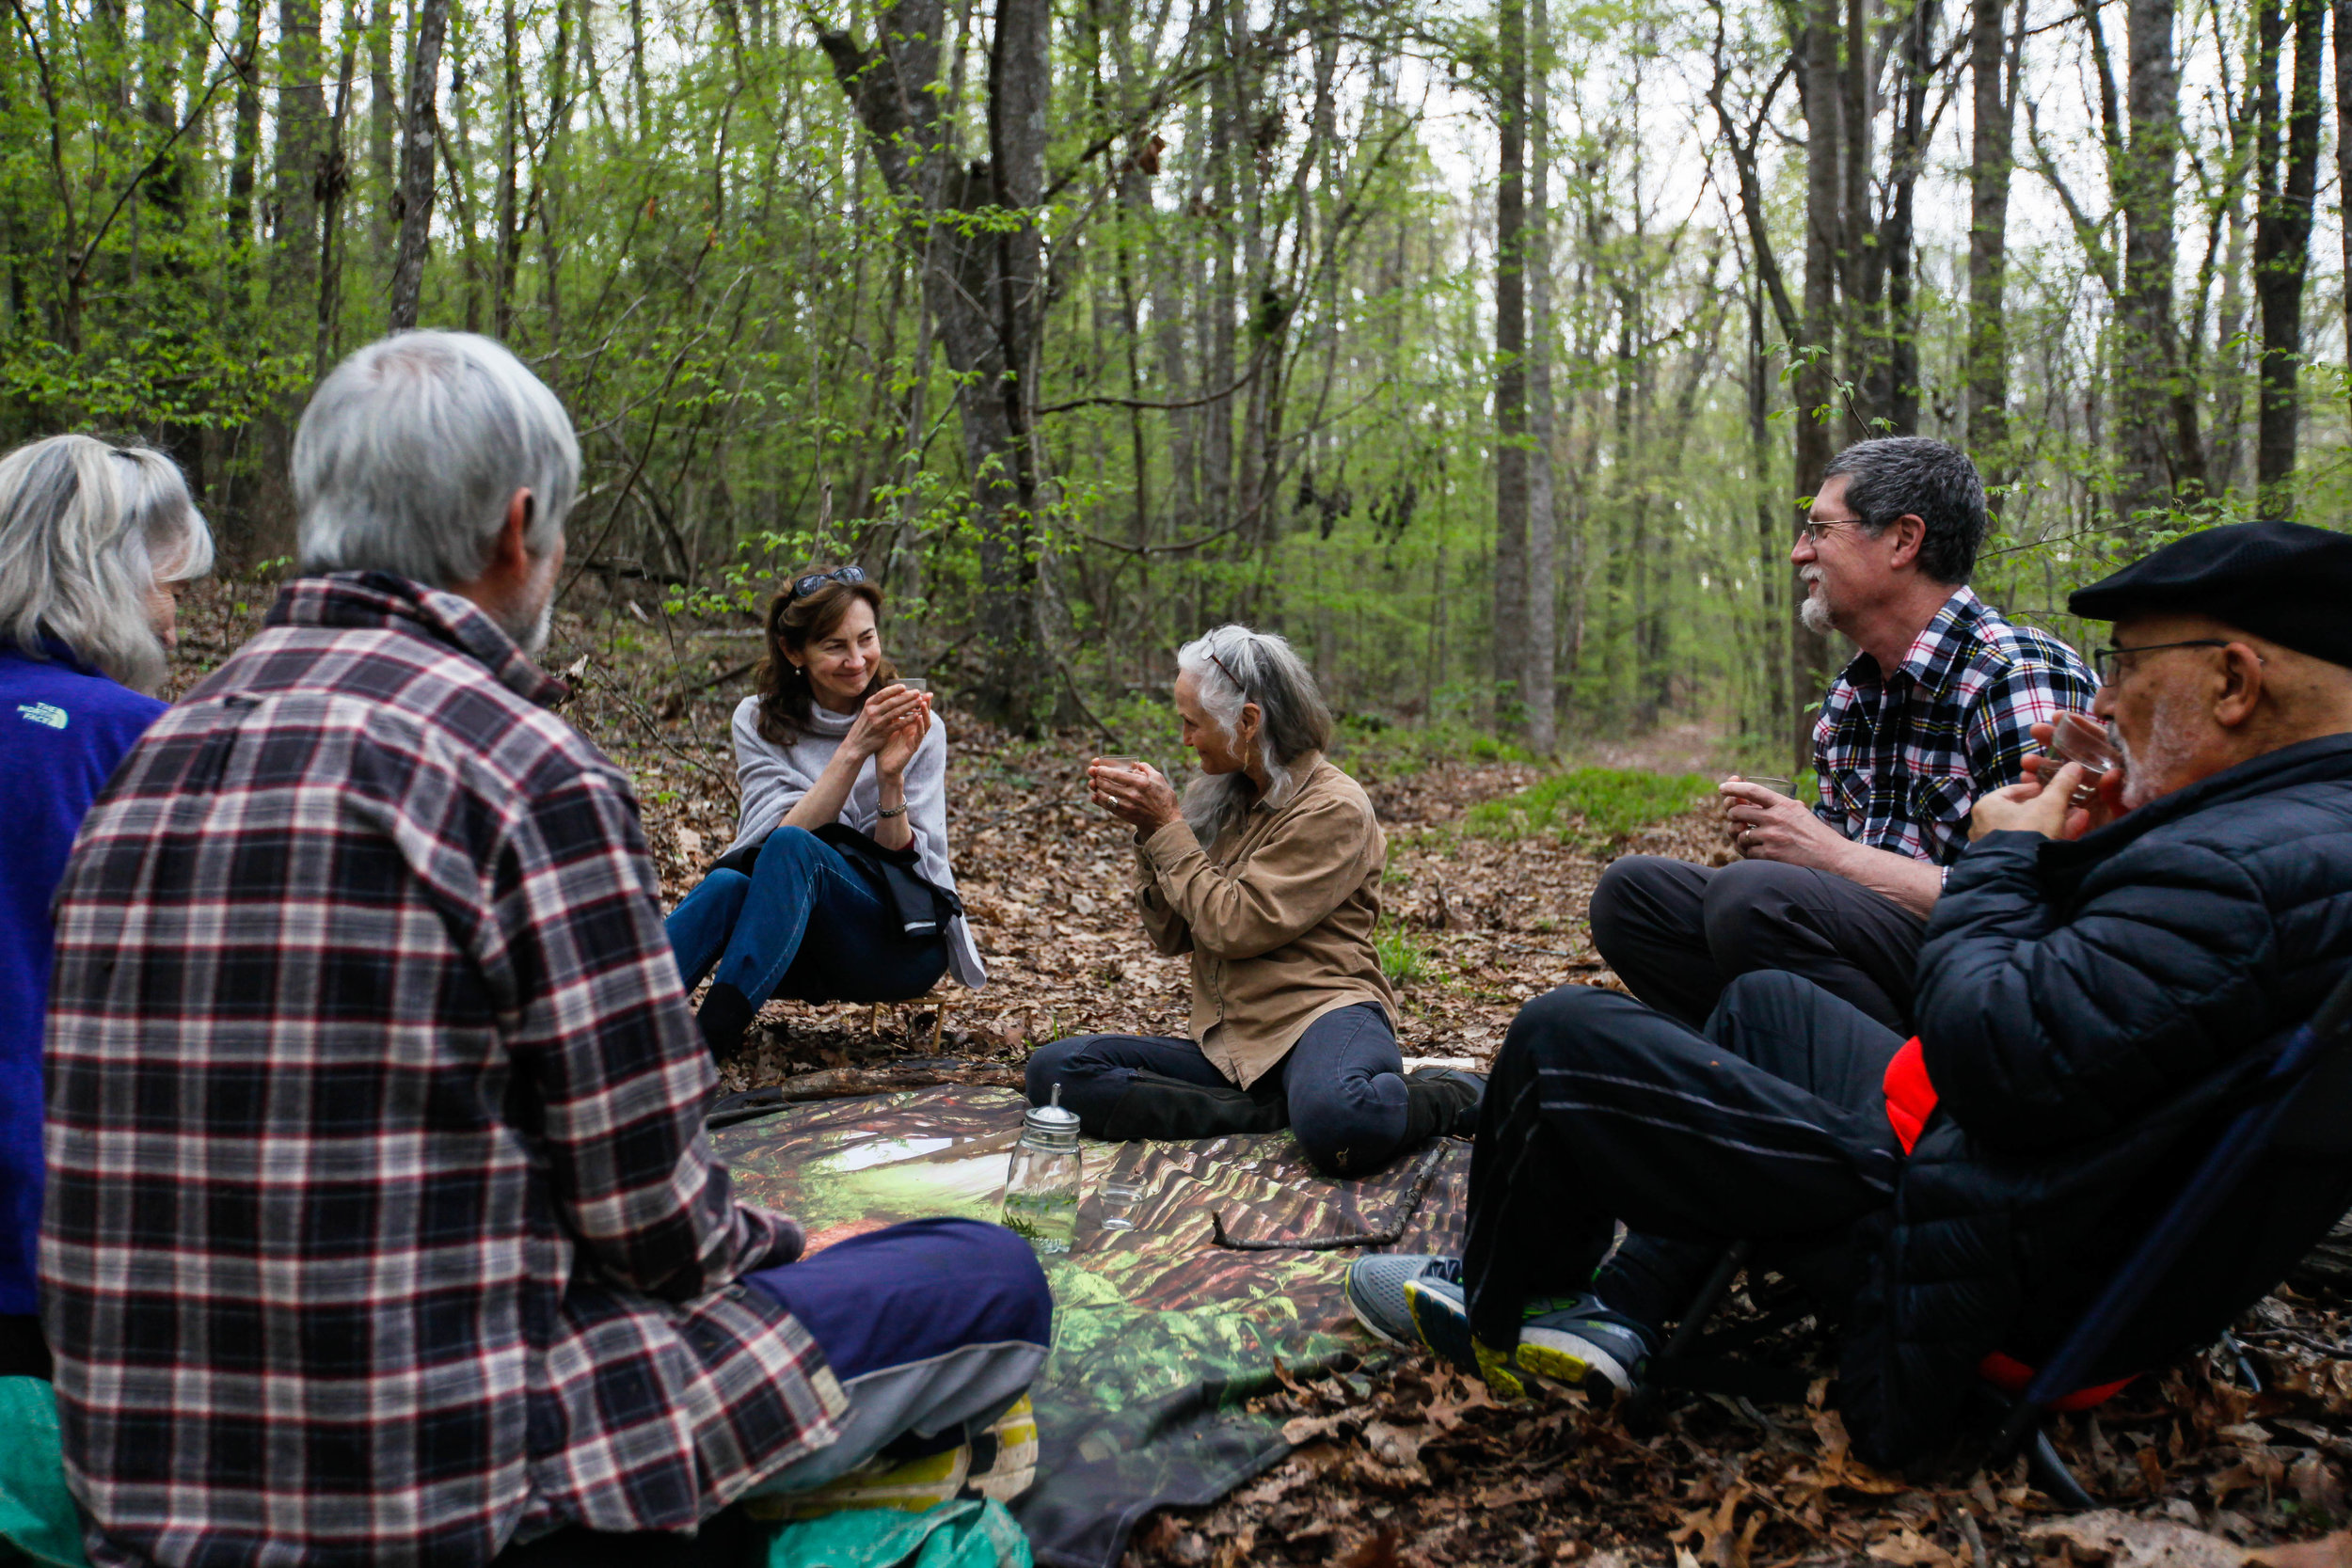  After spending some alone time with nature and spiritual questions to individually ponder, Tinsley regathers her group of friends for an afternoon of tea, companionship and contemplation at Earthsong on Saturday, April 7, 2018. 